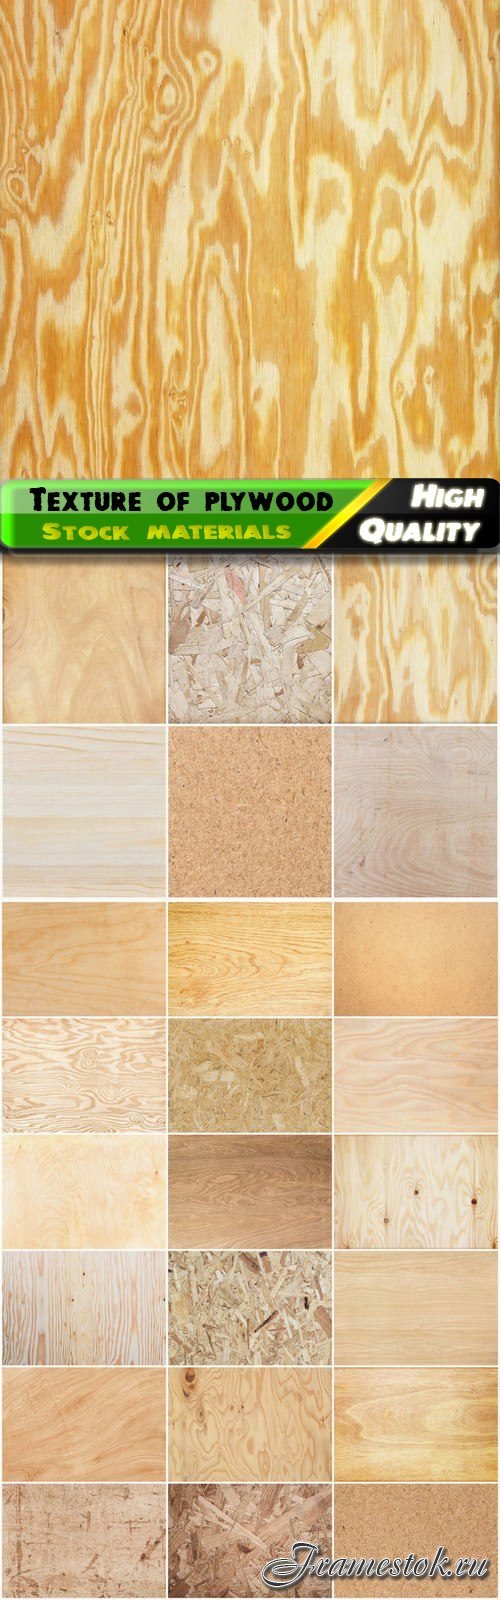 Texture of wood and plywood - 25 HQ Jpg